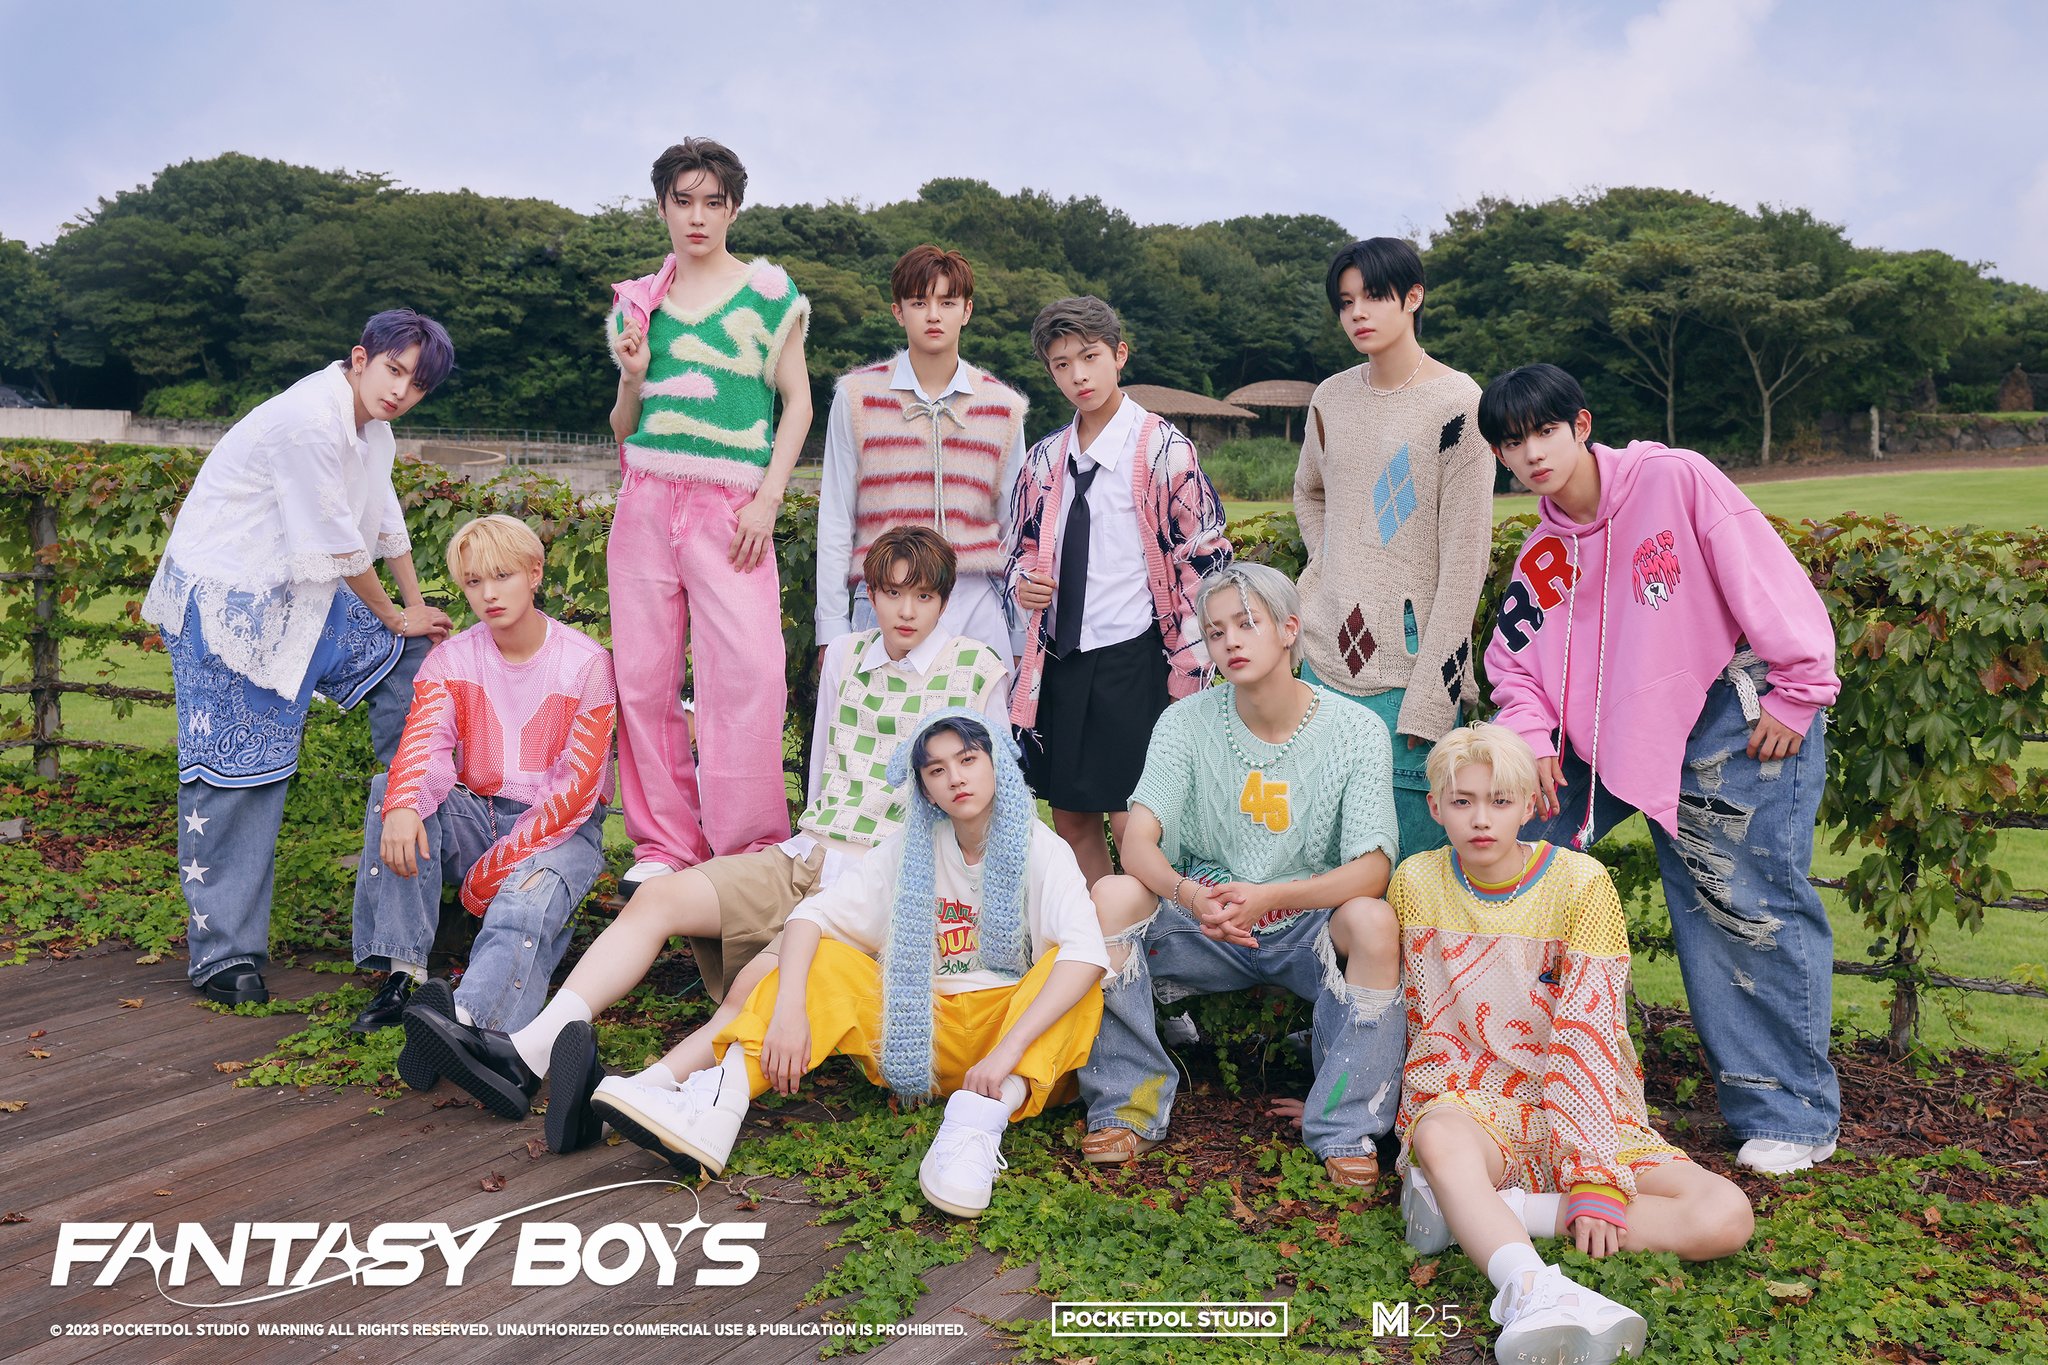 How Old Are the Fantasy Boys Members?